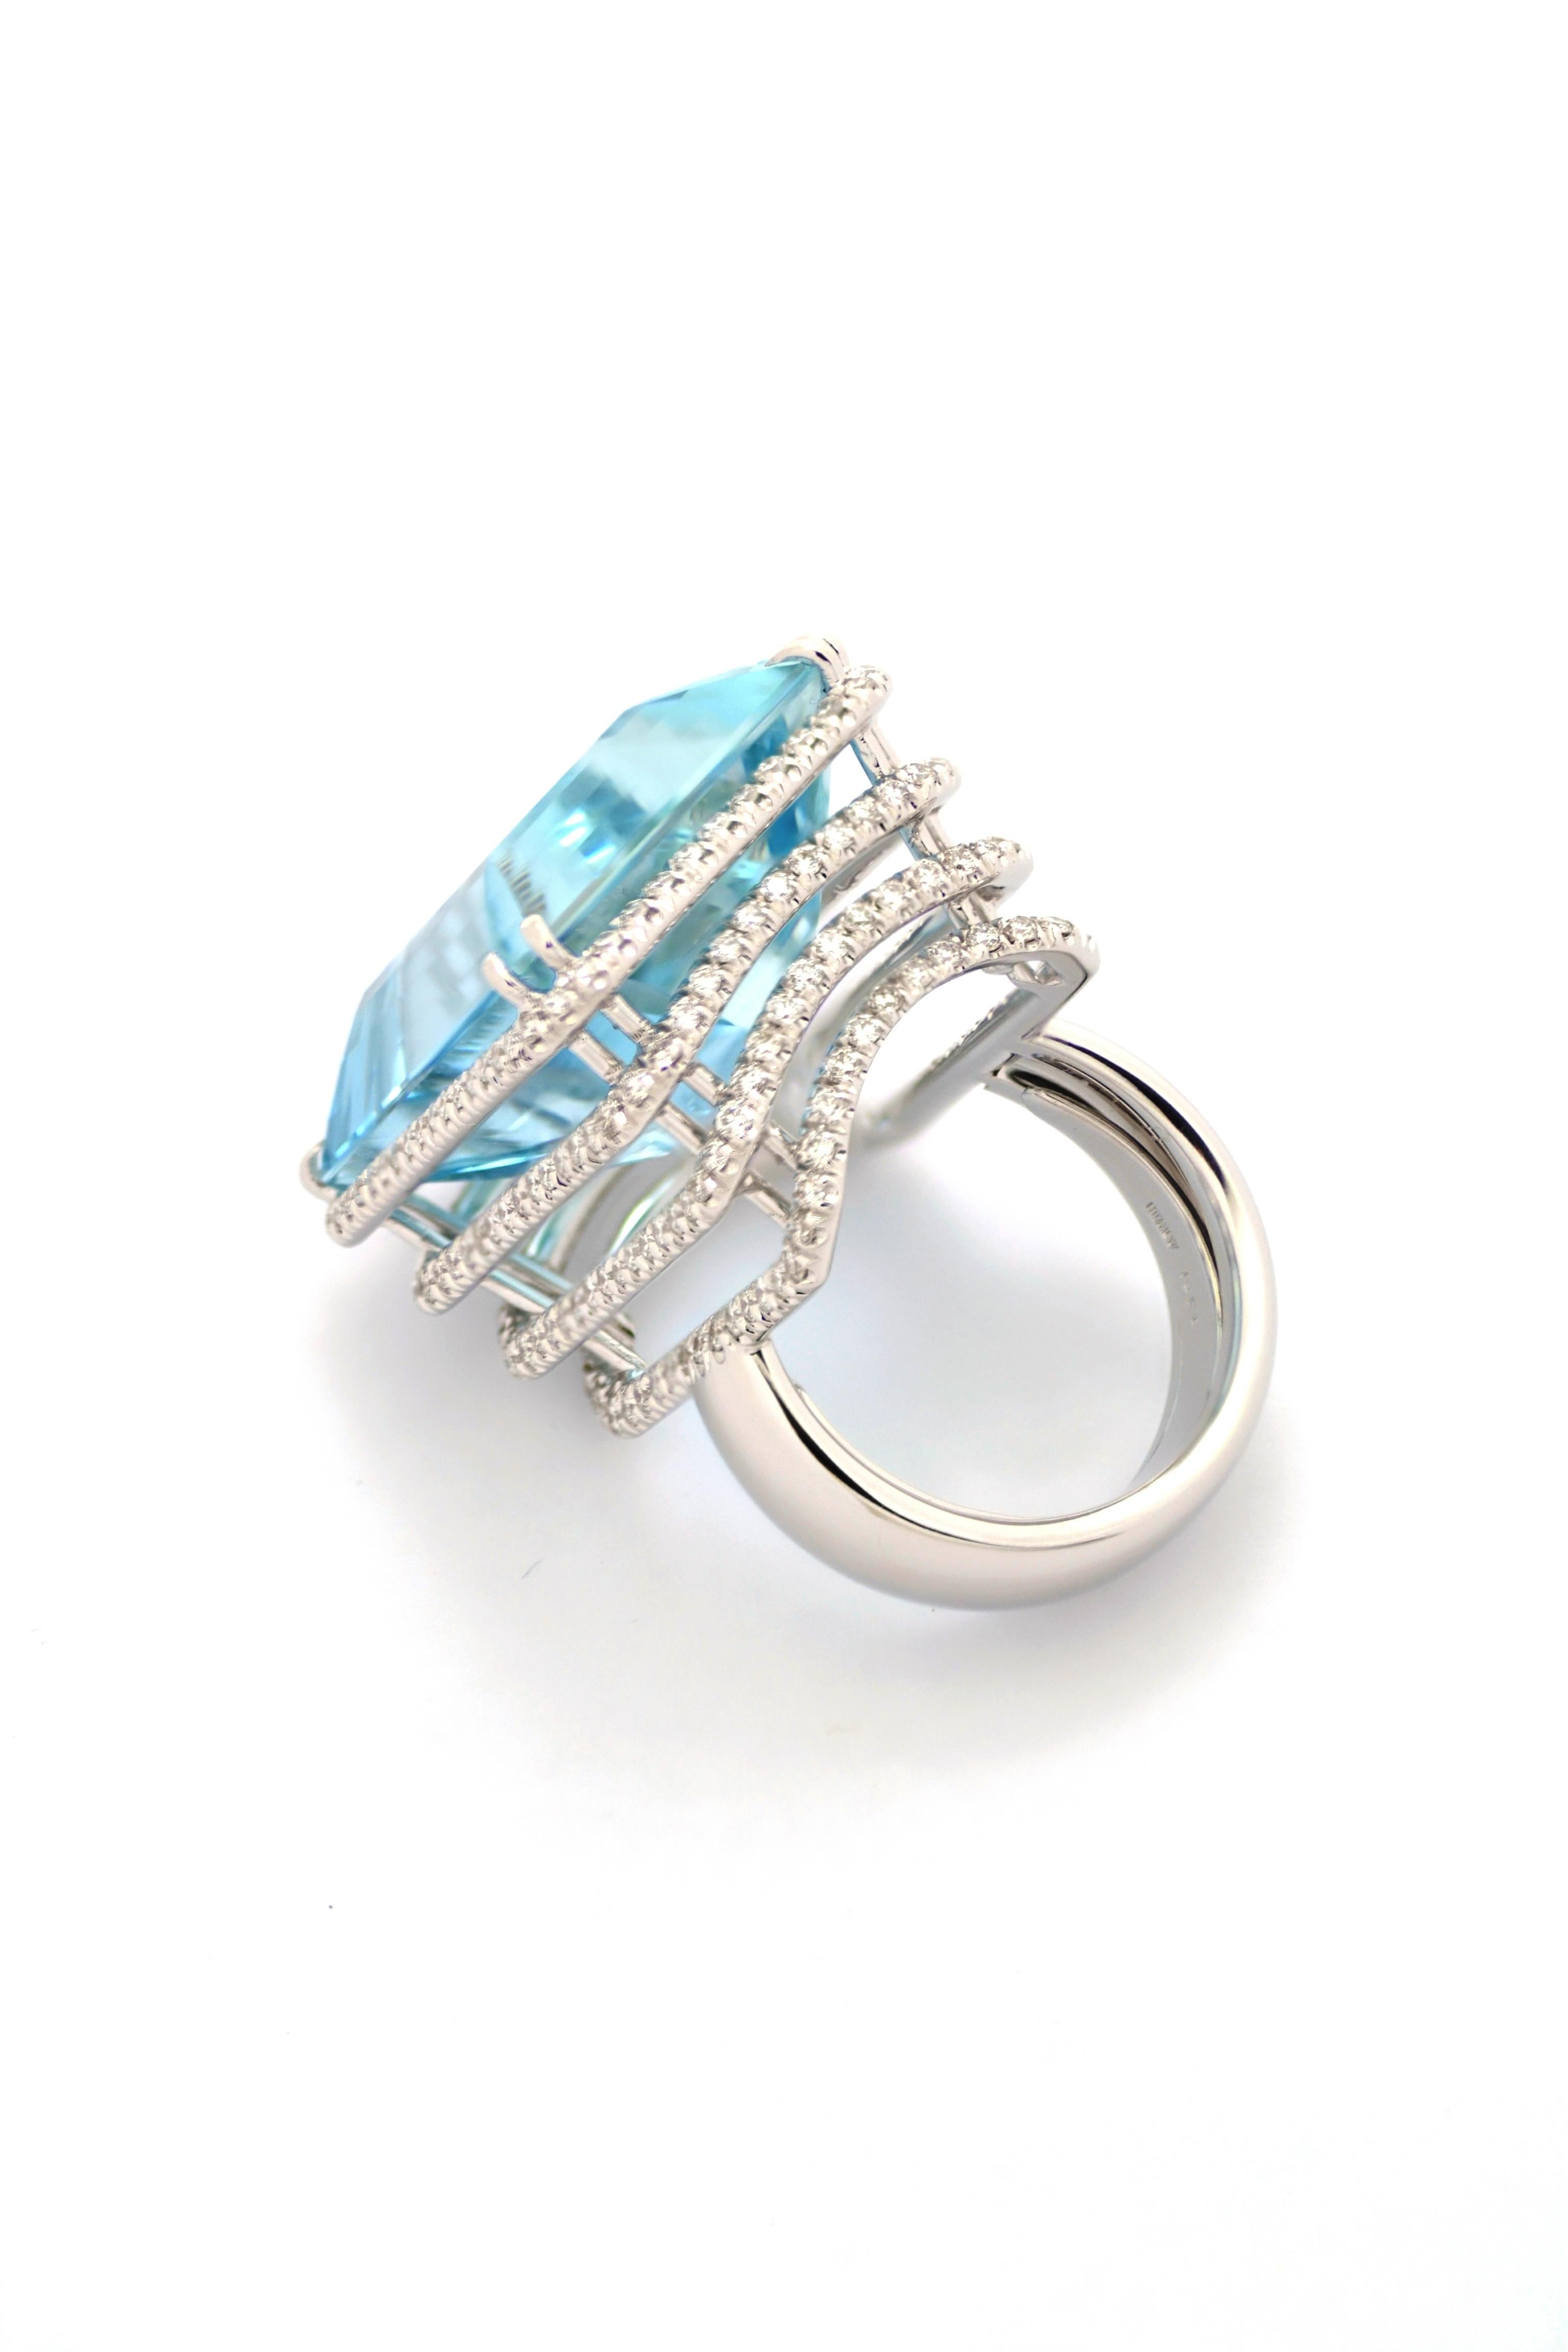 Impressive cocktail ring, designed and handcrafted in Margherita Burgener family workshop, Italy.
Centering a clean, natural, beautiful Brazilian 36.75 carat aquamarine.

18 KT white gold  grams 15.84
n. 224 diamonds total carat 1.76  quality of the